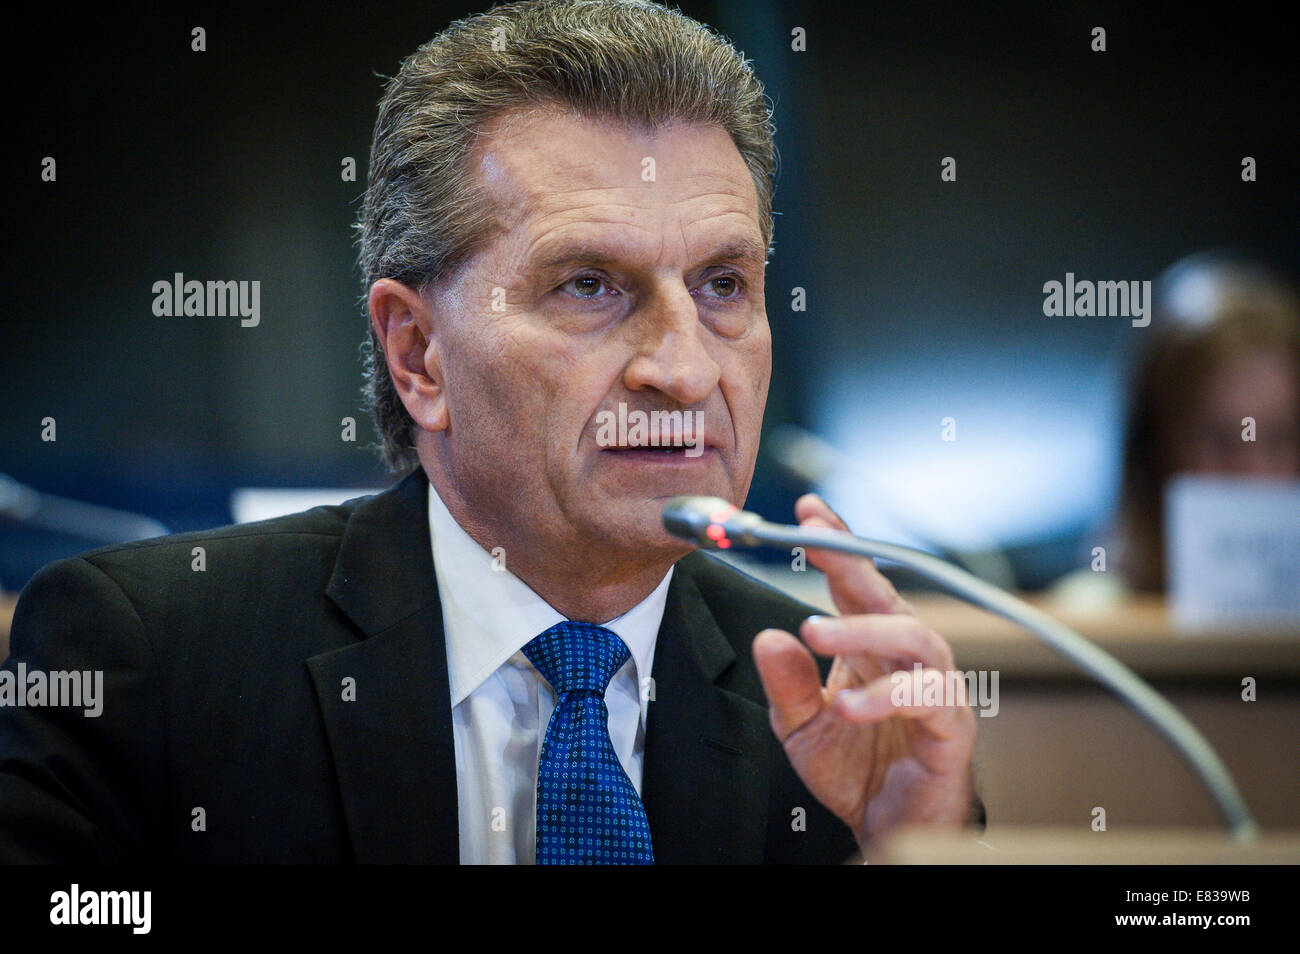 Brussels, Bxl, Belgium. 29th Sep, 2014. EU Commissioner-designate for the digital economy and society, Guenther Oettinger from Germany during a hearing by the Committee on Industry, Research and Energy, the Committee on Culture and Education, the Committee on Internal Market and Consumer Protection, the commision of Legal Affairs and the Committee on Civil Liberties, Justice and Home Affairs, at the European Parliament in Brussels, Belgium on 29.09.2014 by Wiktor Dabkowski Credit:  Wiktor Dabkowski/ZUMA Wire/Alamy Live News Stock Photo